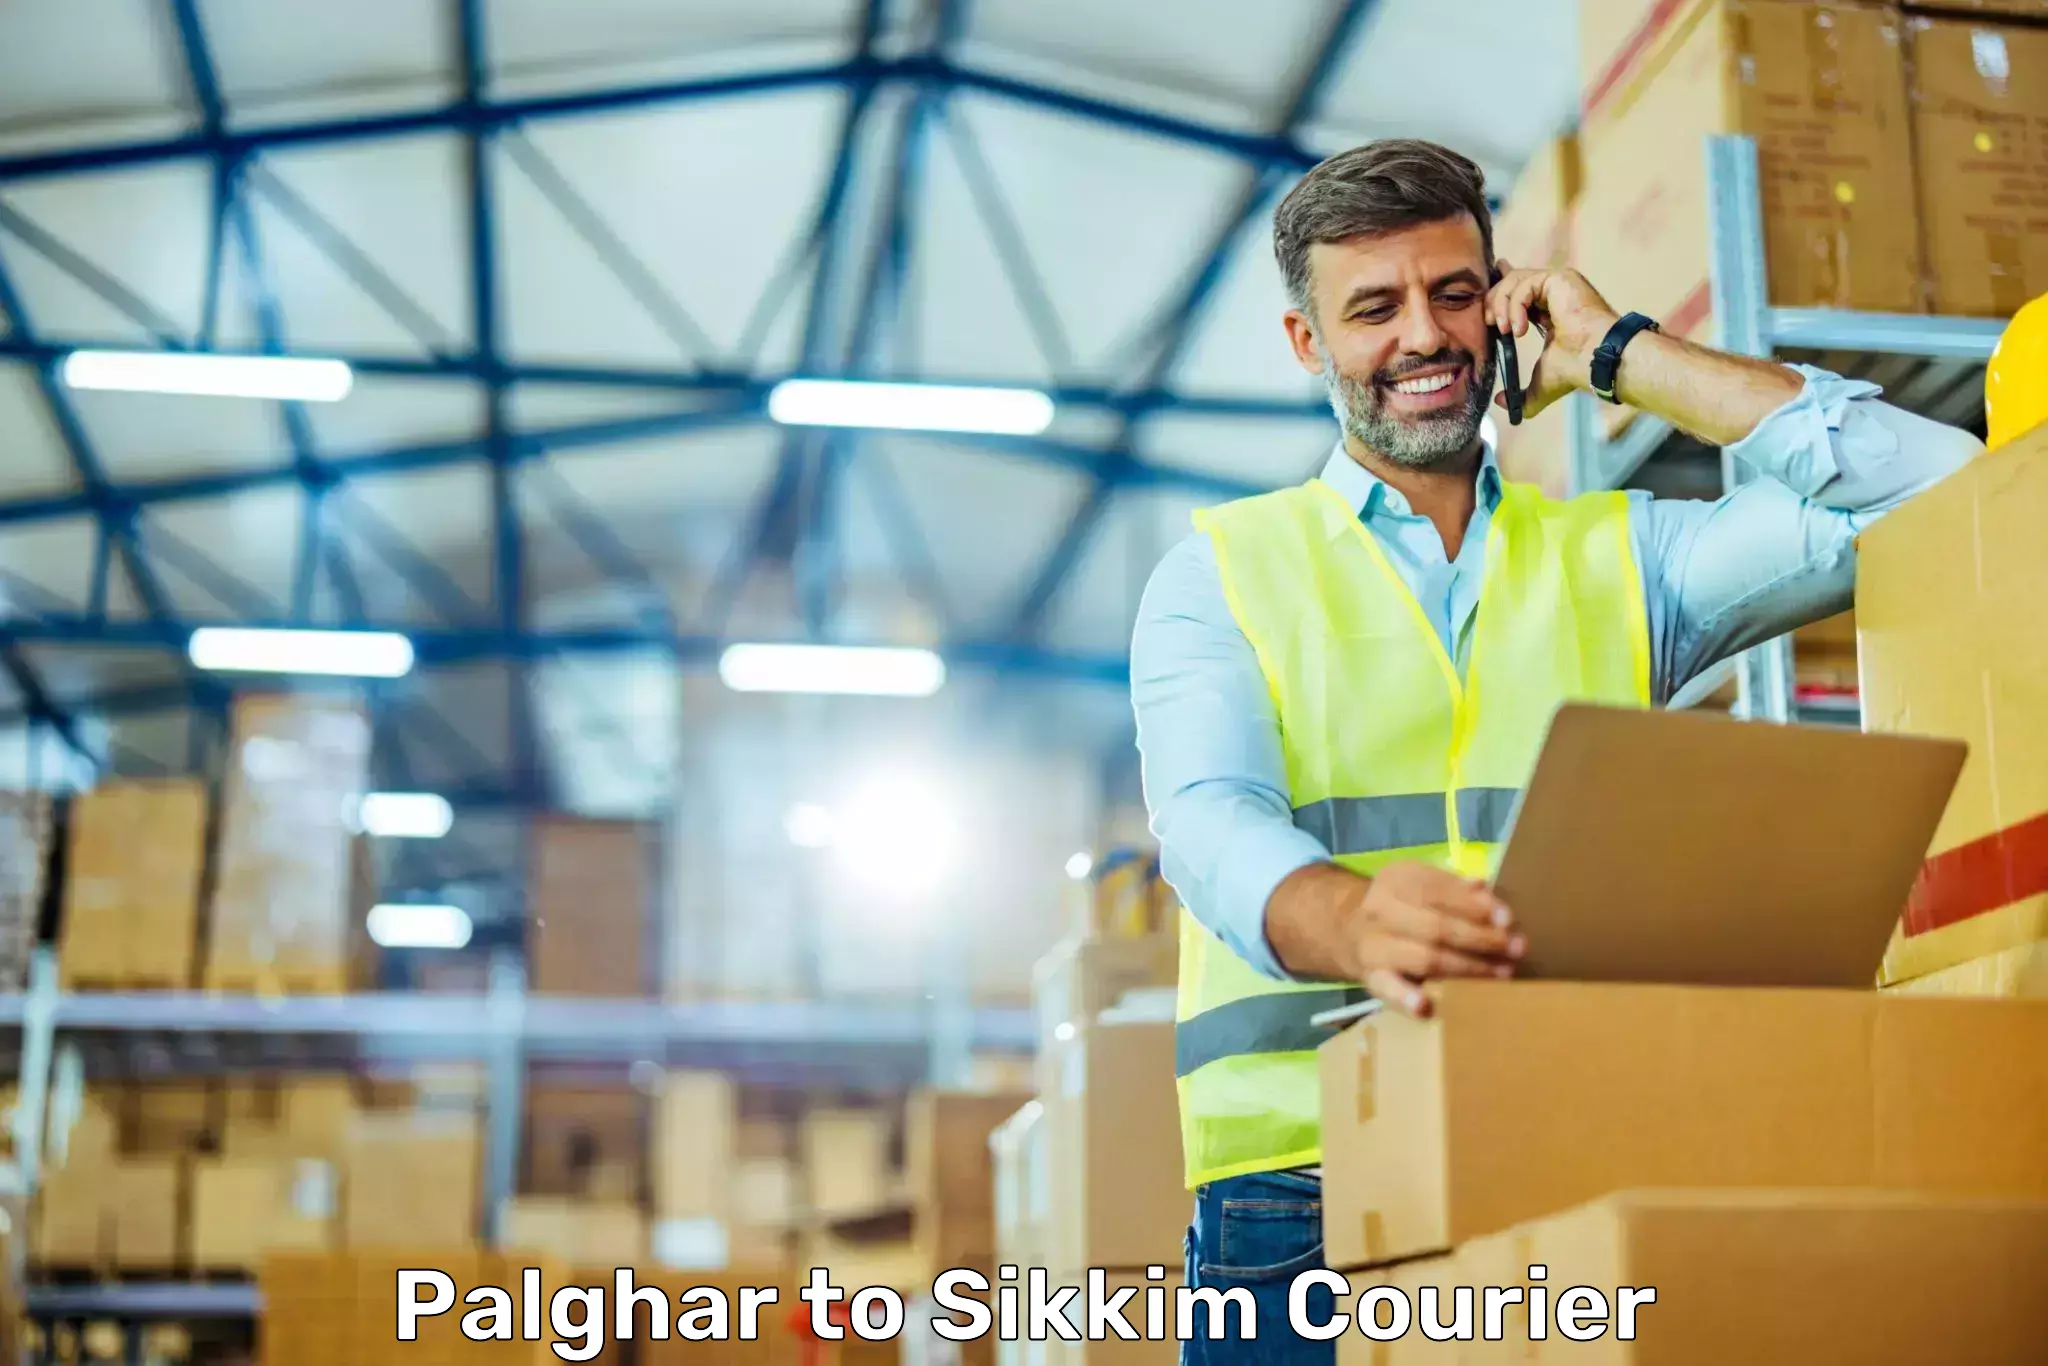 Cash on delivery service Palghar to South Sikkim